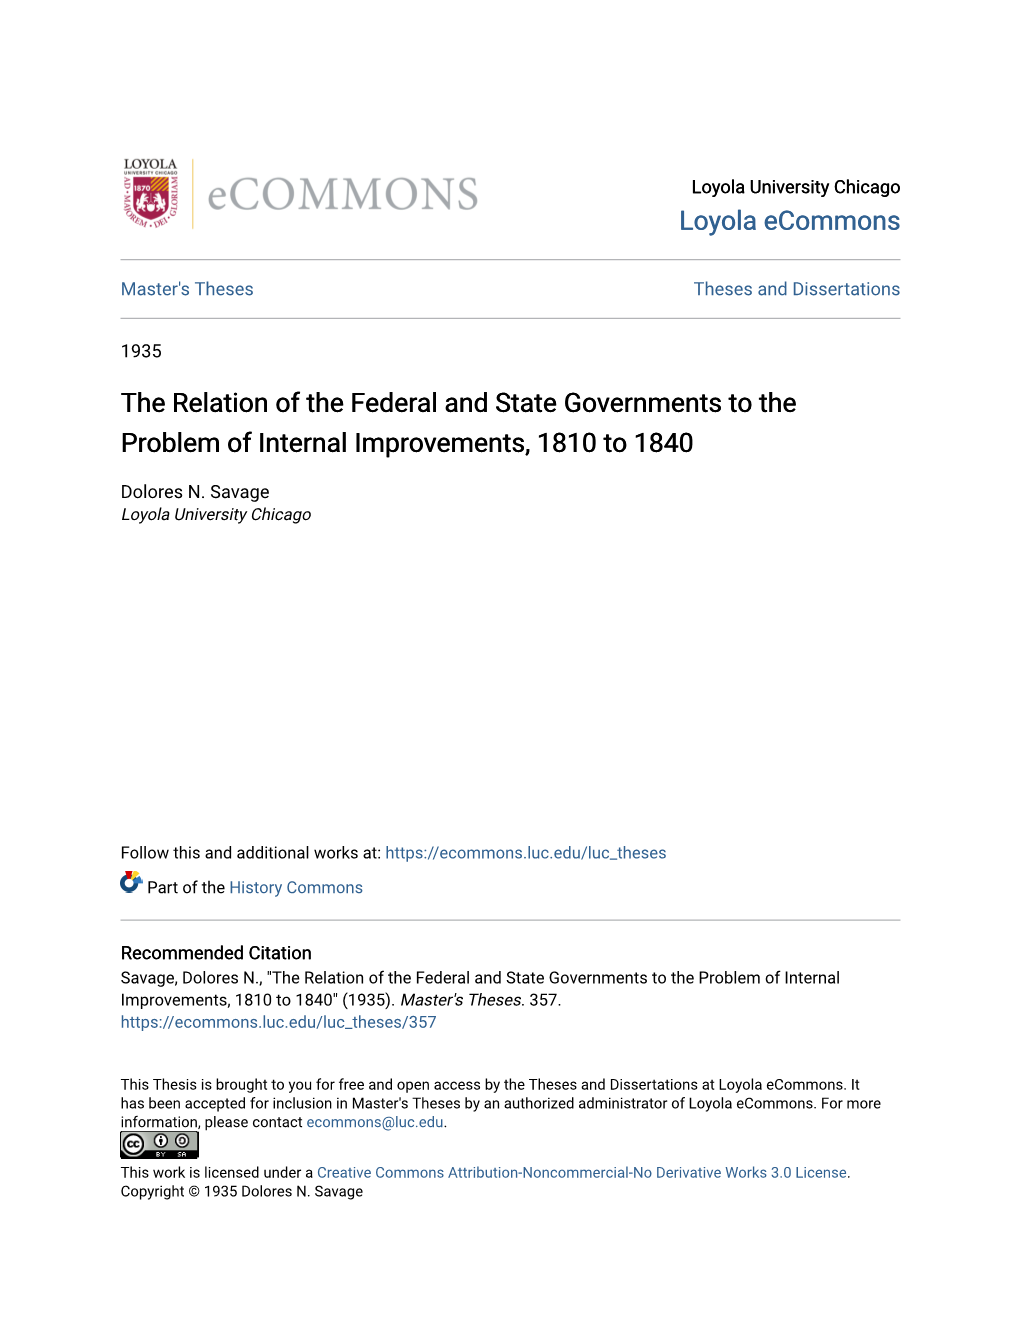 The Relation of the Federal and State Governments to the Problem of Internal Improvements, 1810 to 1840